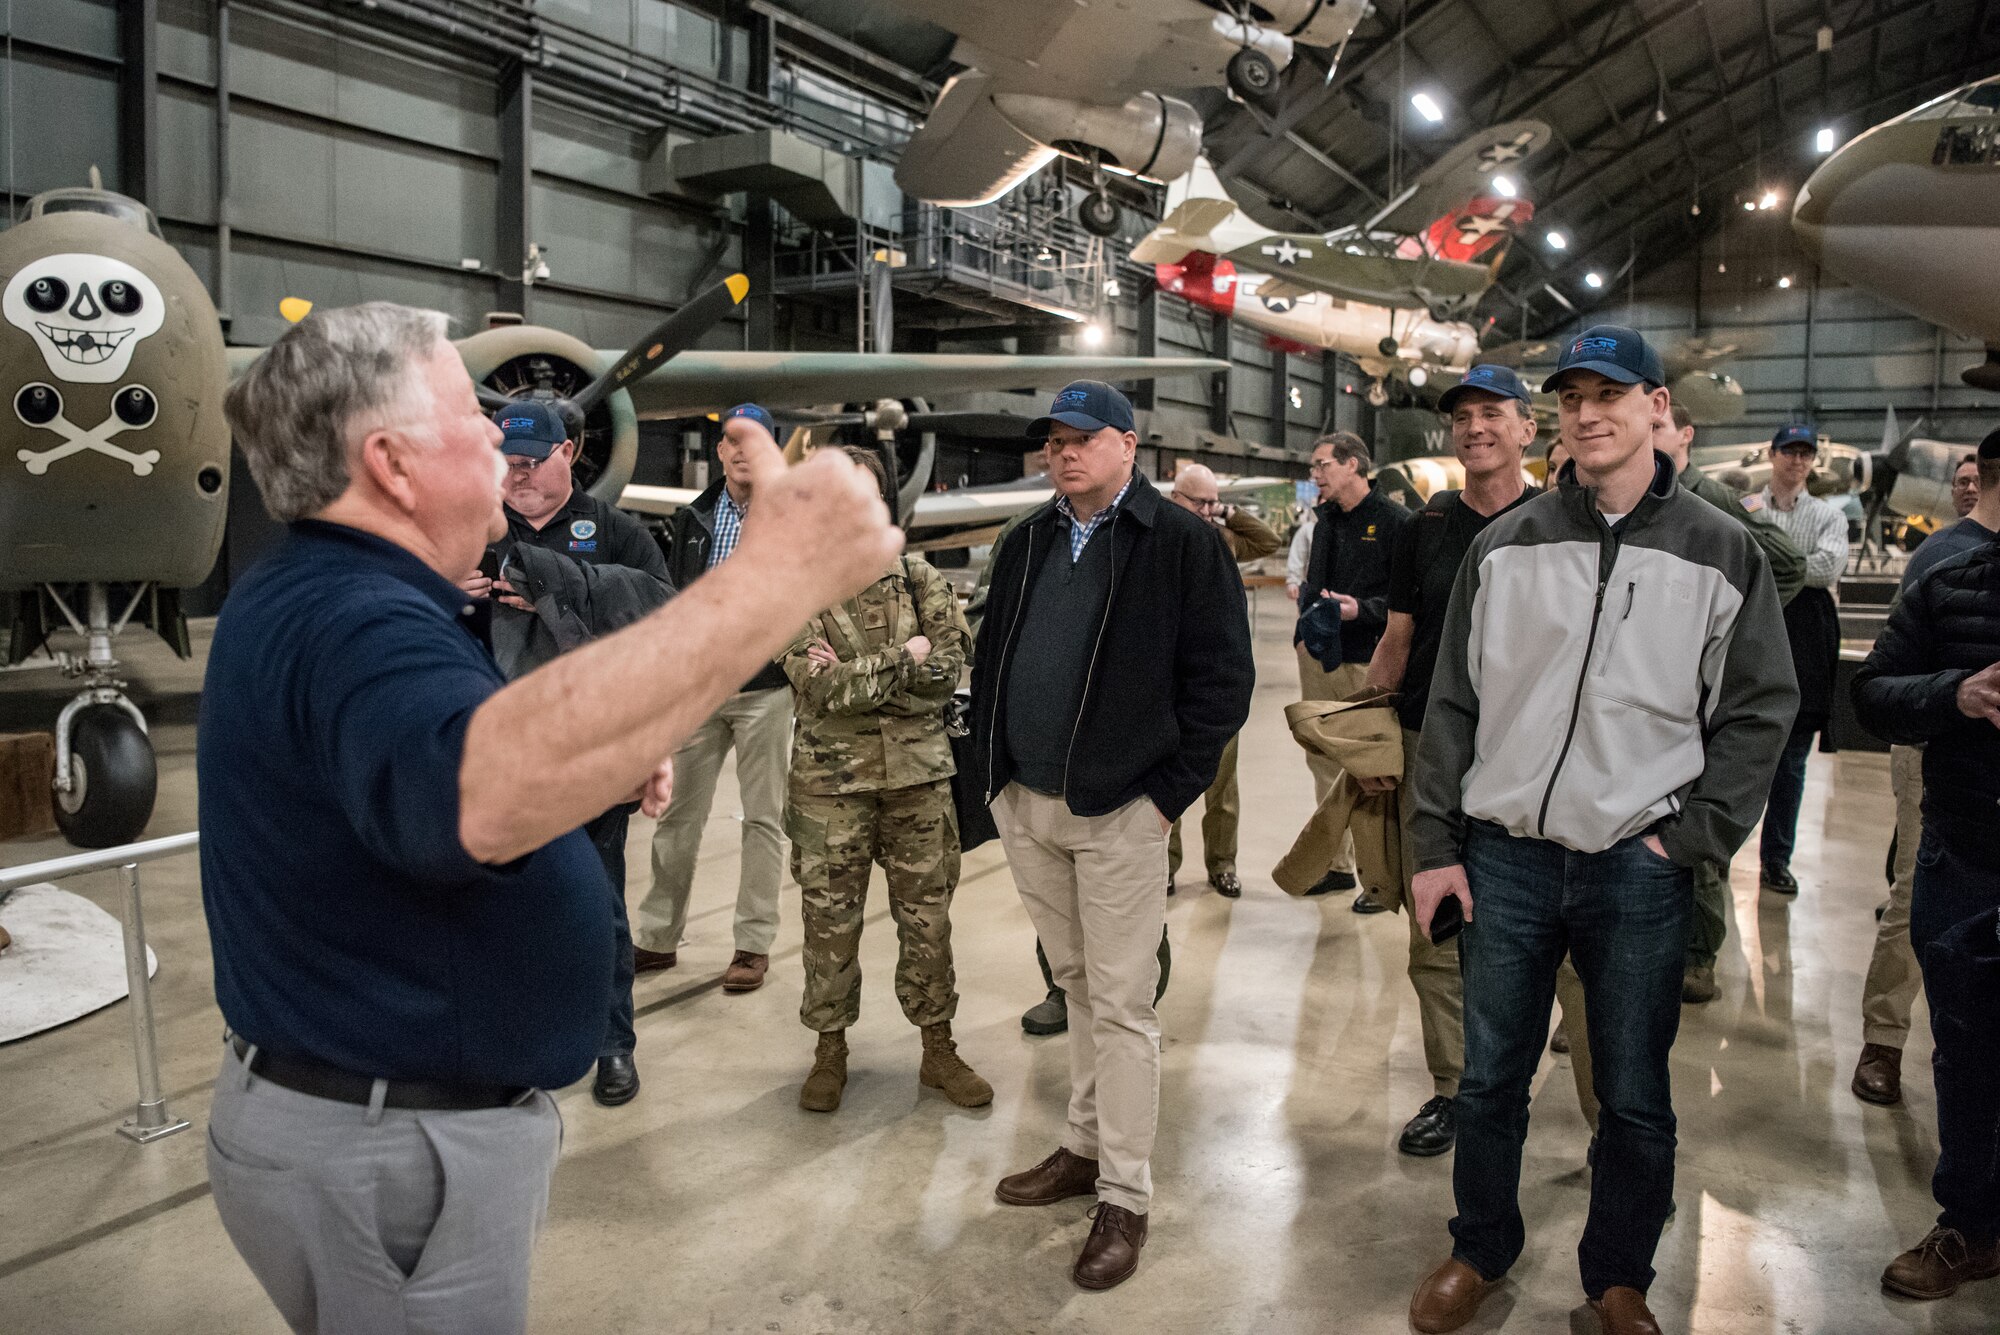 More than two-dozen civilian employers tour the National Museum of the United States Air Force at Wright-Patterson Air Force Base, Ohio, March 15, 2019, with Airmen from the 123rd Airlift Wing and representatives of the Kentucky Committee for Employer Support of the Guard and Reserve. The employers were participating in an ESGR “Bosslift,” which enhances awareness and understanding between National Guardsmen and the civilian employers for whom they work when they’re not on duty. (U.S. Air National Guard photo by Staff Sgt. Joshua Horton)